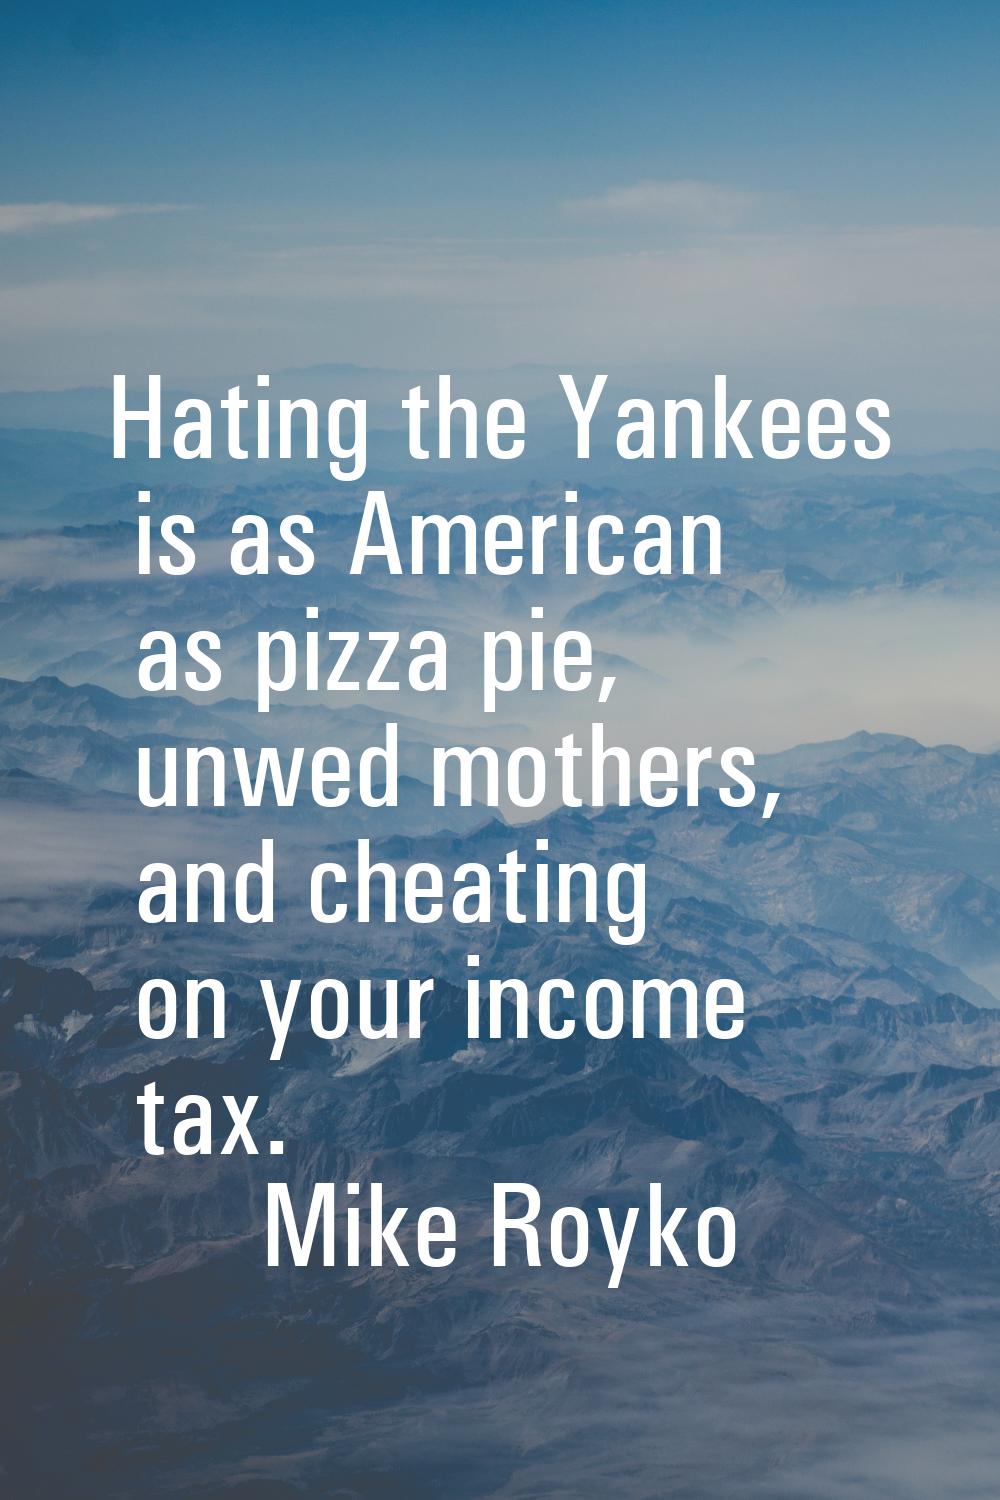 Hating the Yankees is as American as pizza pie, unwed mothers, and cheating on your income tax.